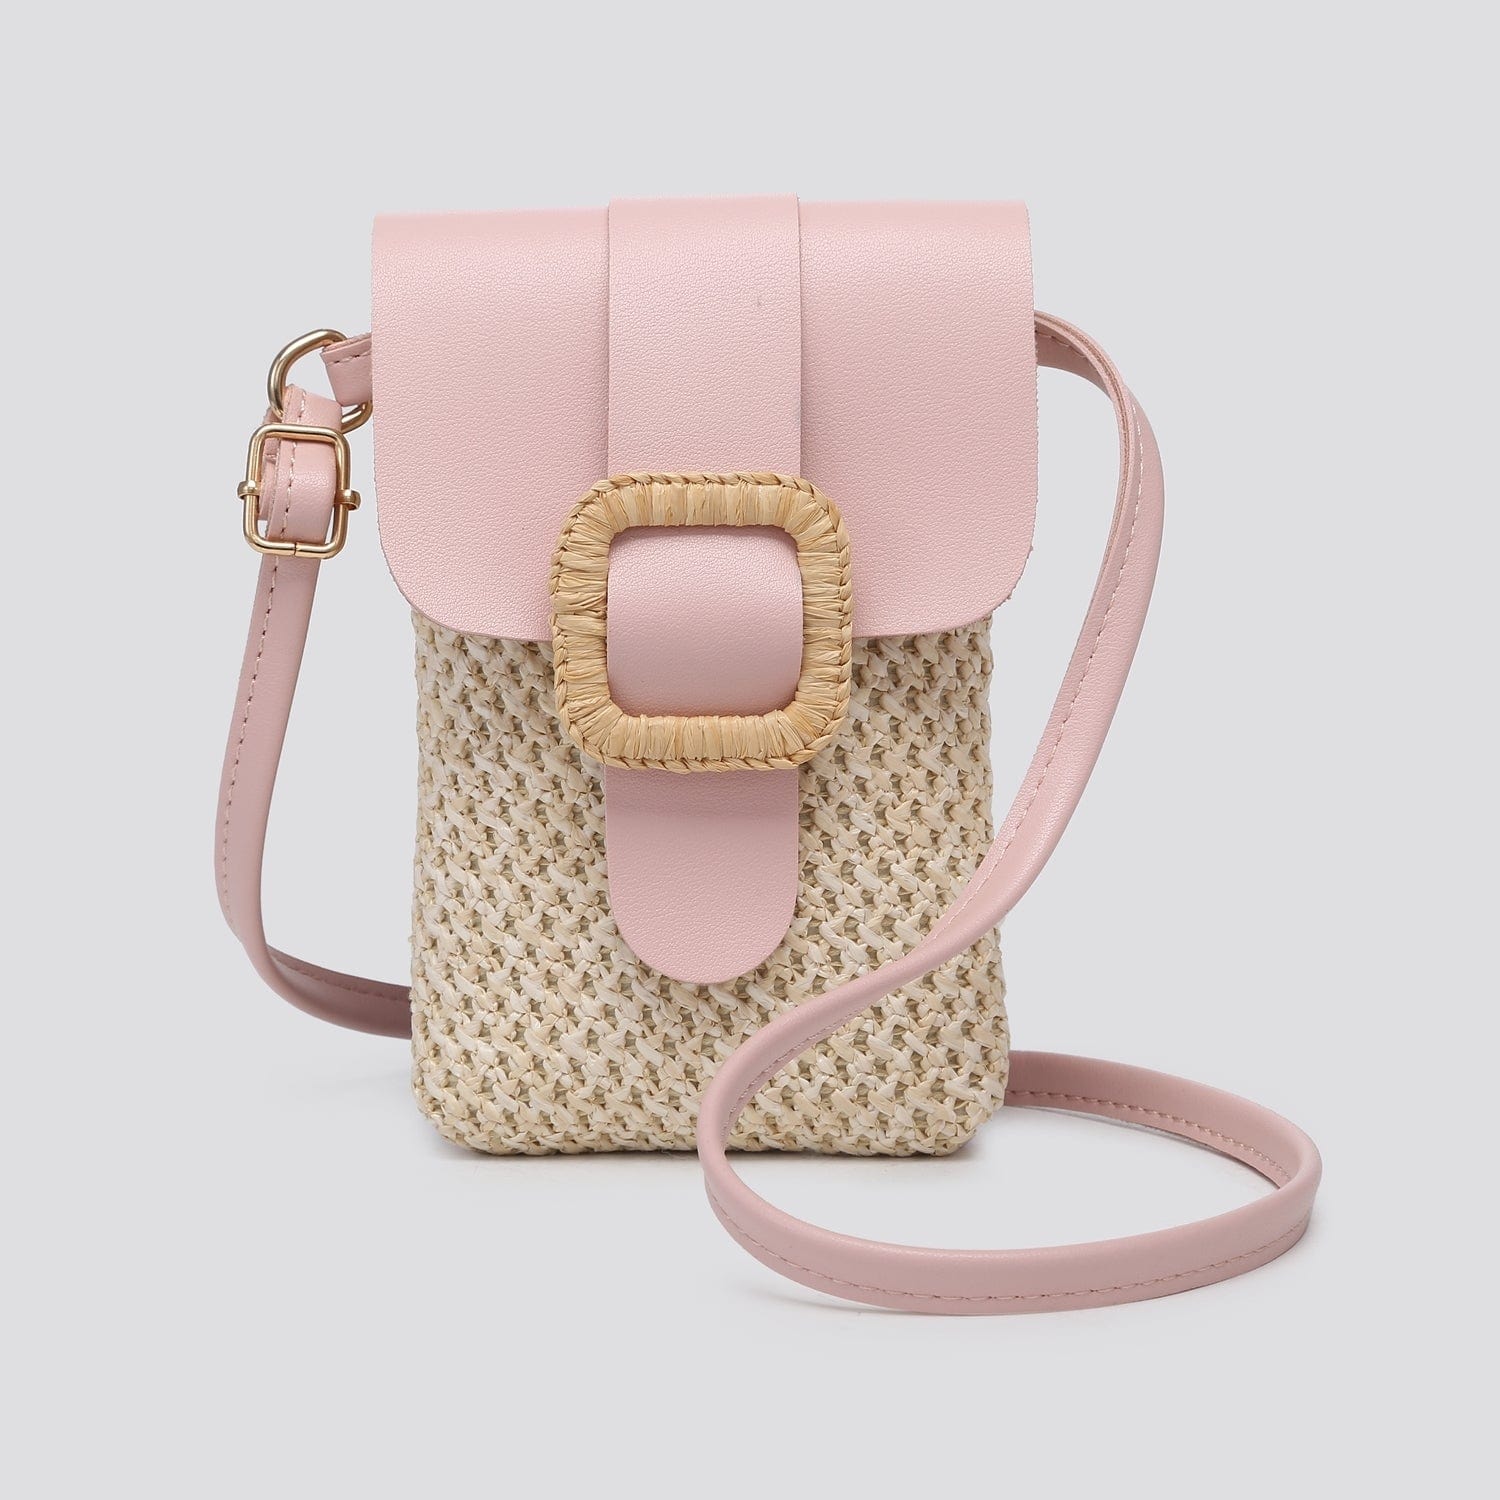 lusciousscarves Handbags Pale Pink Crossbody Phone Pouch , Woven Design Small Bag